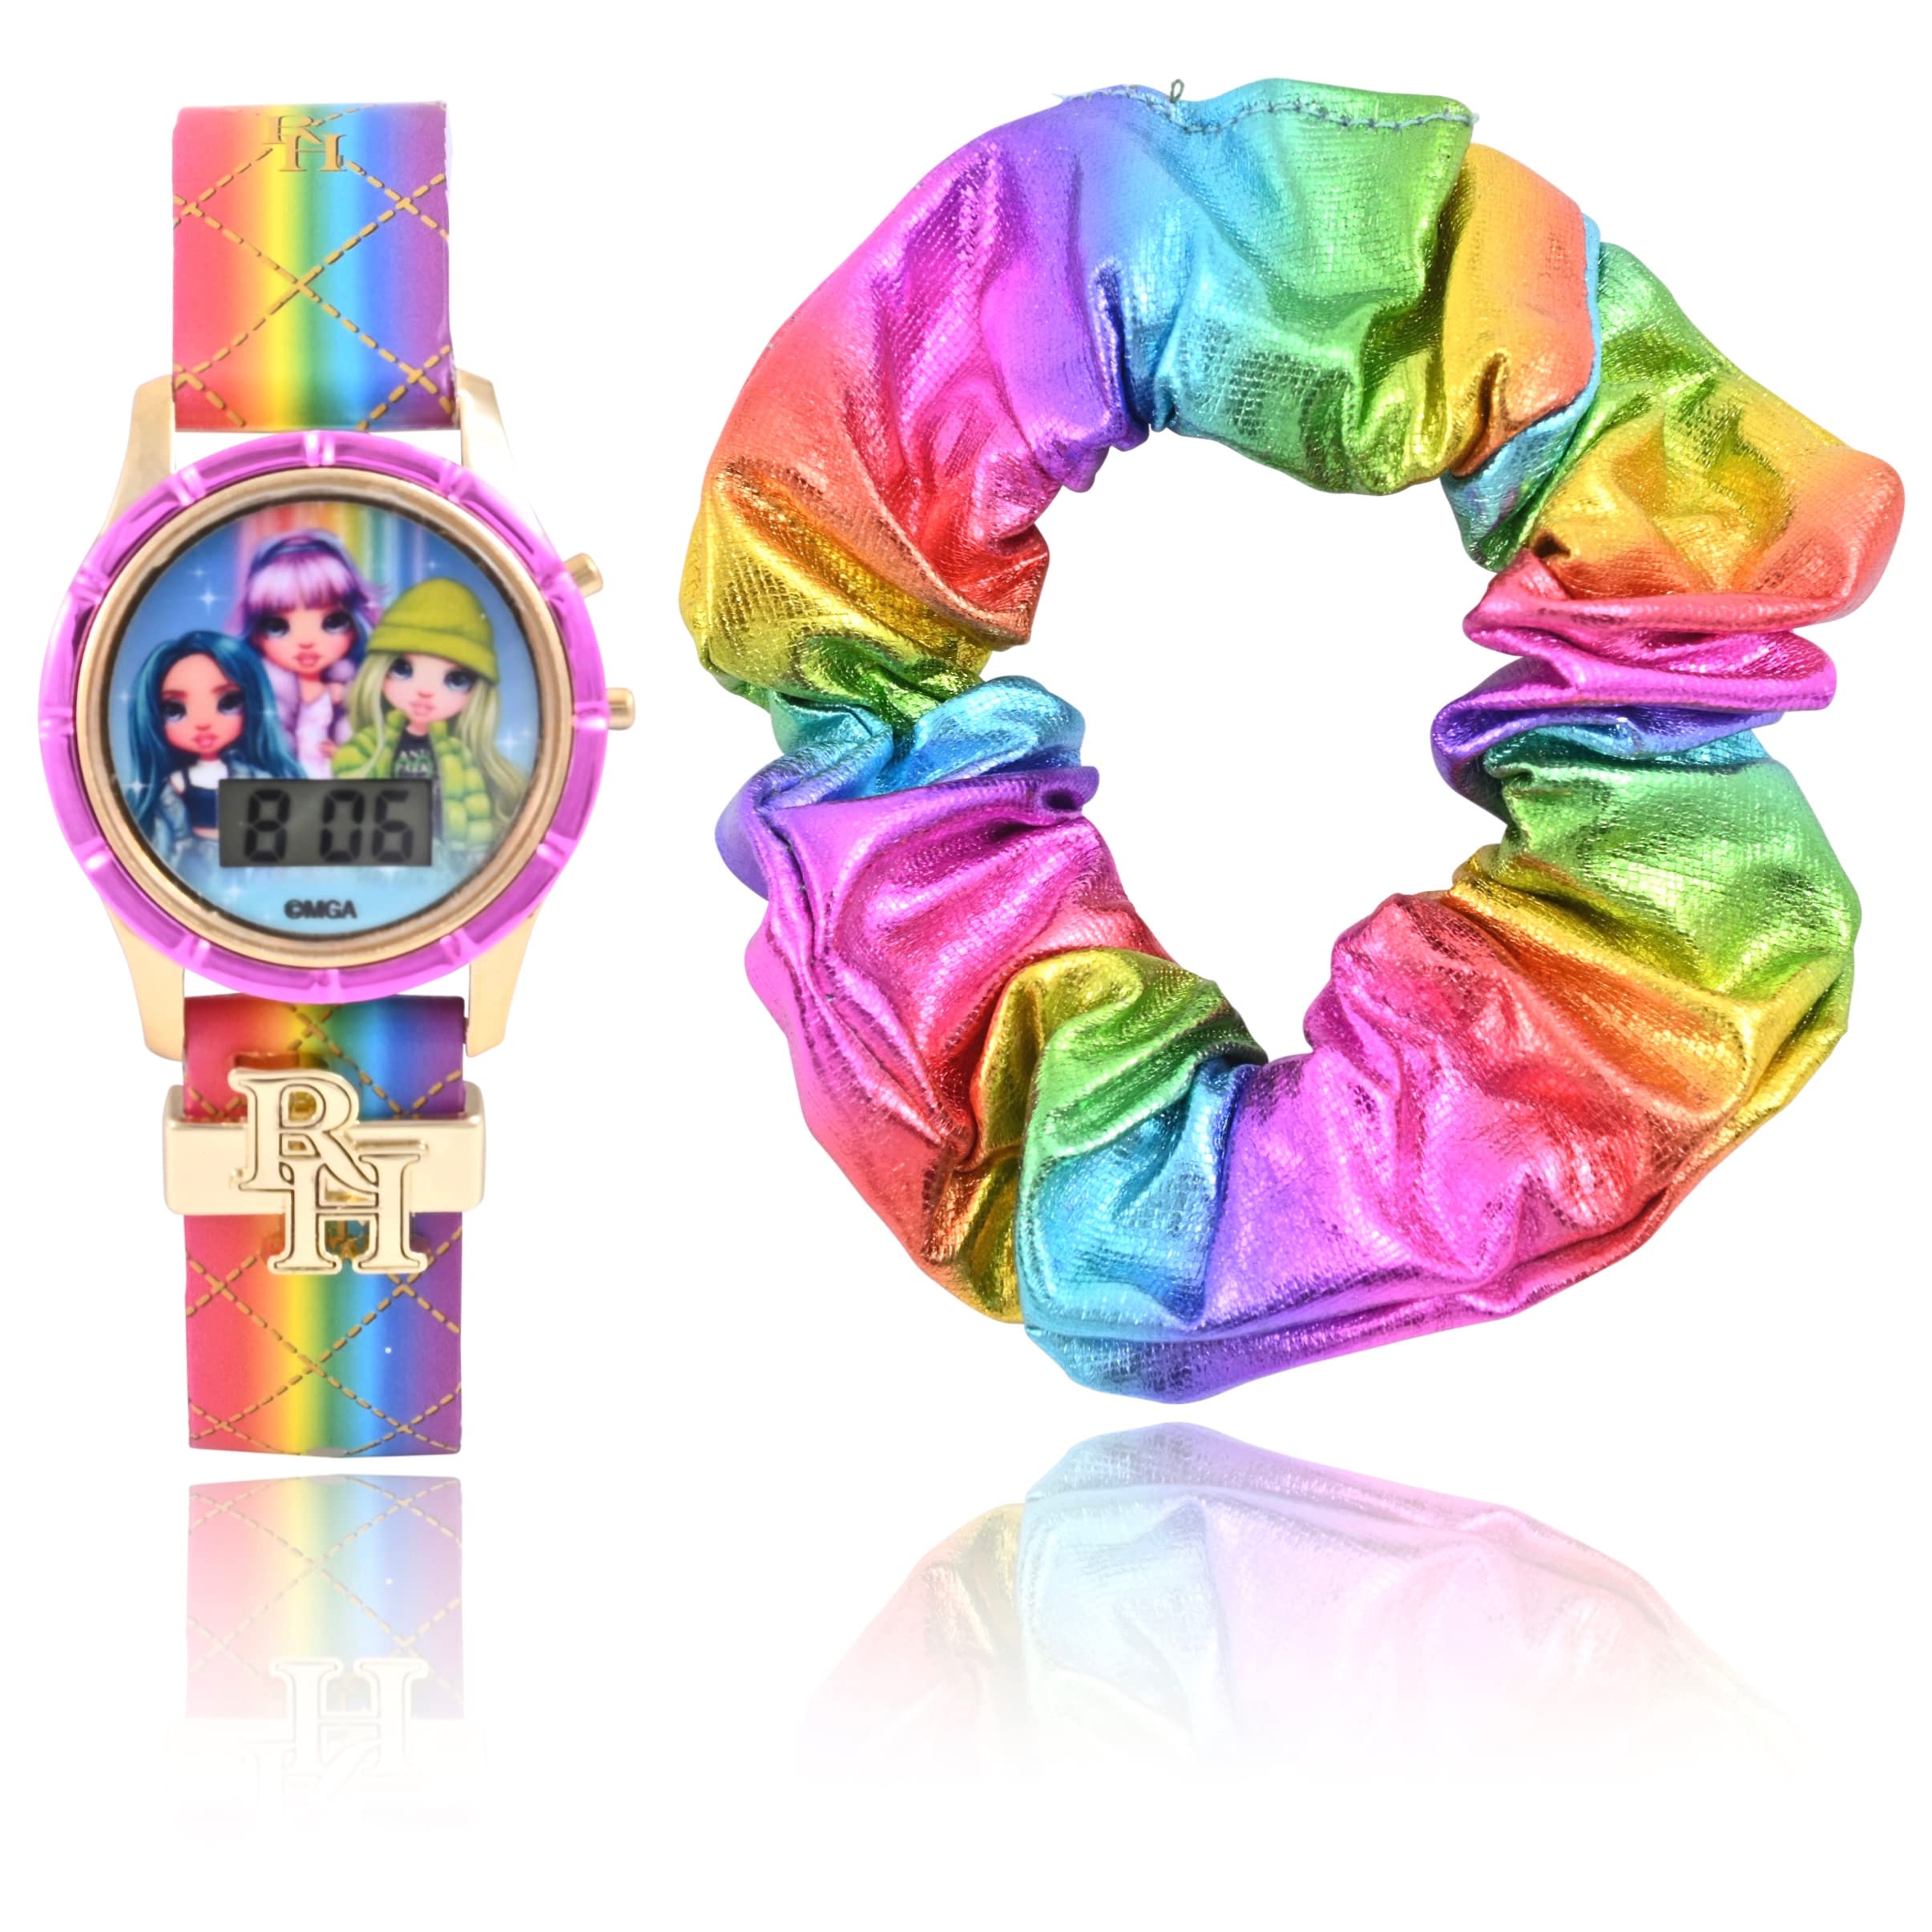 Accutime Rainbow High Kids Digital Watch Set - LED Flashing Lights, LCD Watch Display, with A Hair Band, Kids, Girls Watch, Silicone Strap in Mulity Color (Model: RNB40004AZ)